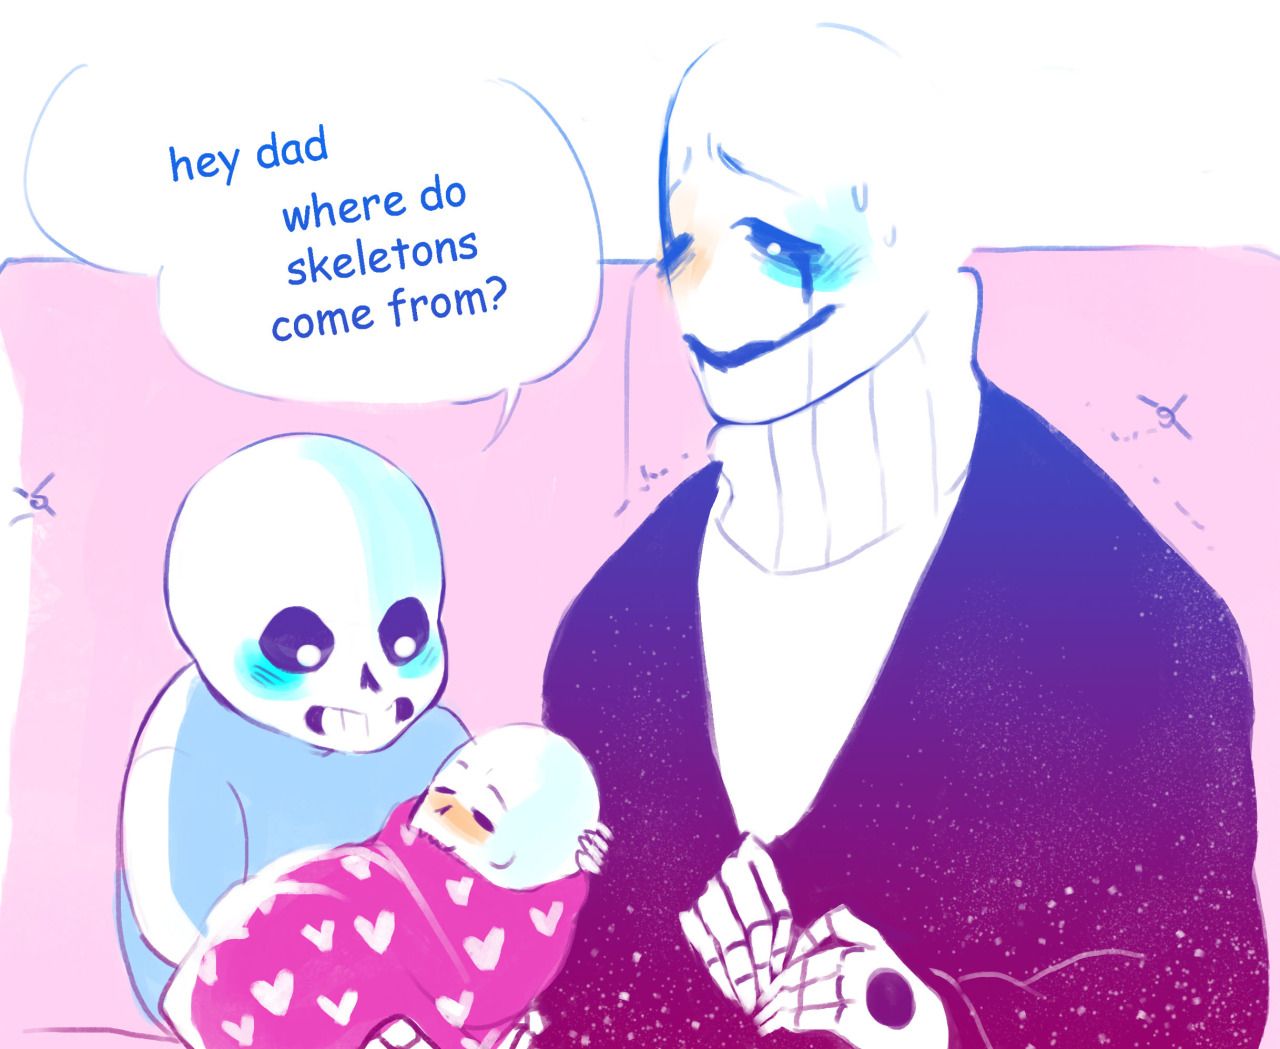 Sans, Papyrus, and Gaster. Undertale gaster